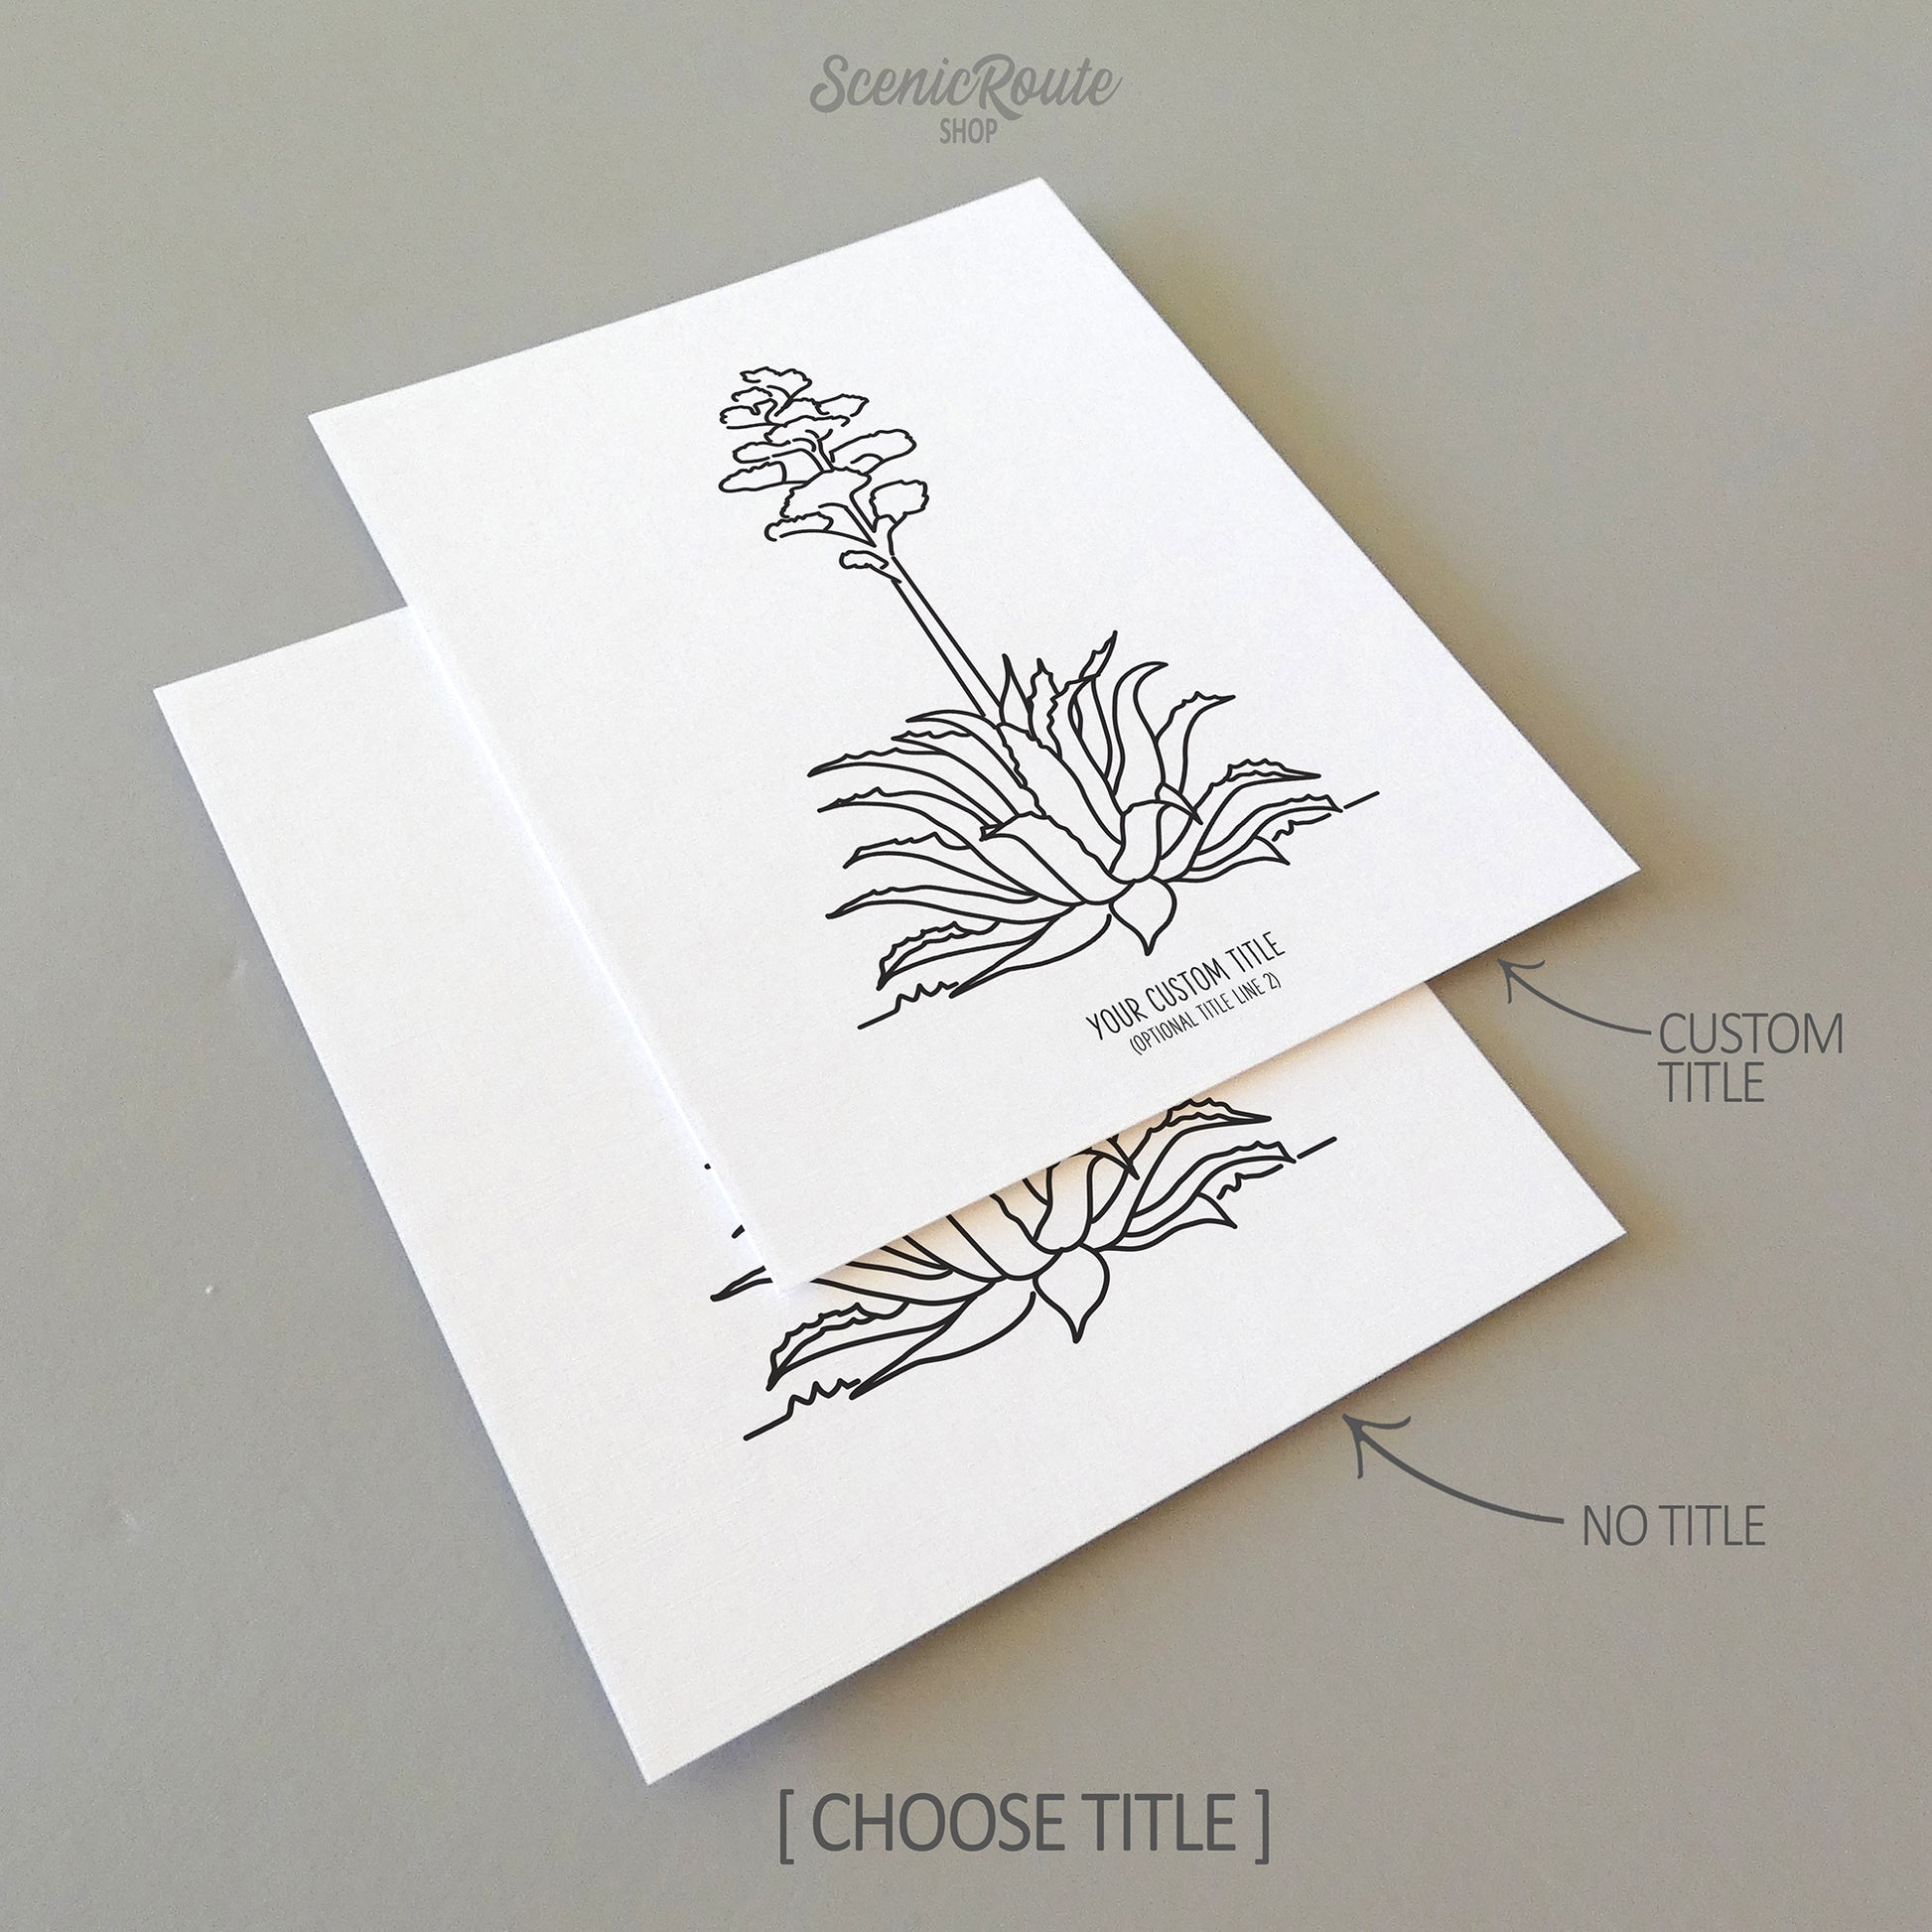 Two line art drawings of a Century Plant Agave on white linen paper with a gray background.  The pieces are shown with “No Title” and “Custom Title” options for the available art print options.